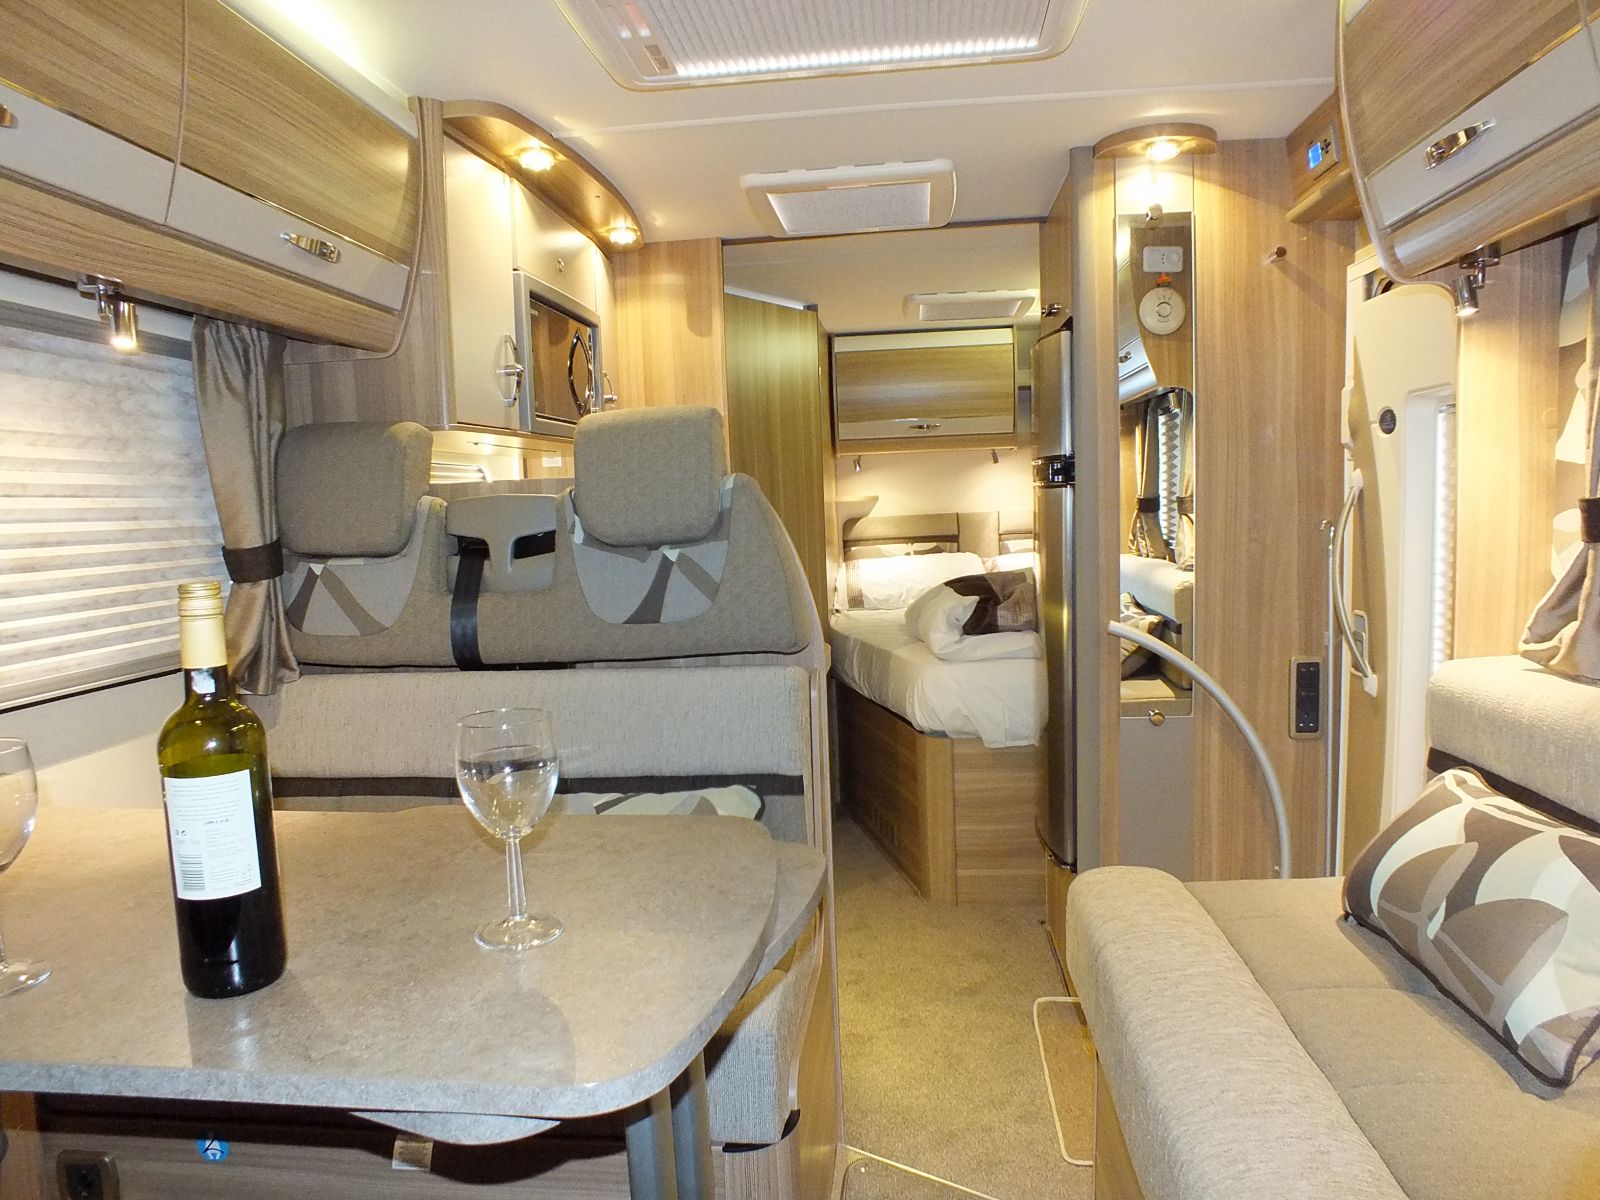 Interior of the motorhome with Scottish Tourer